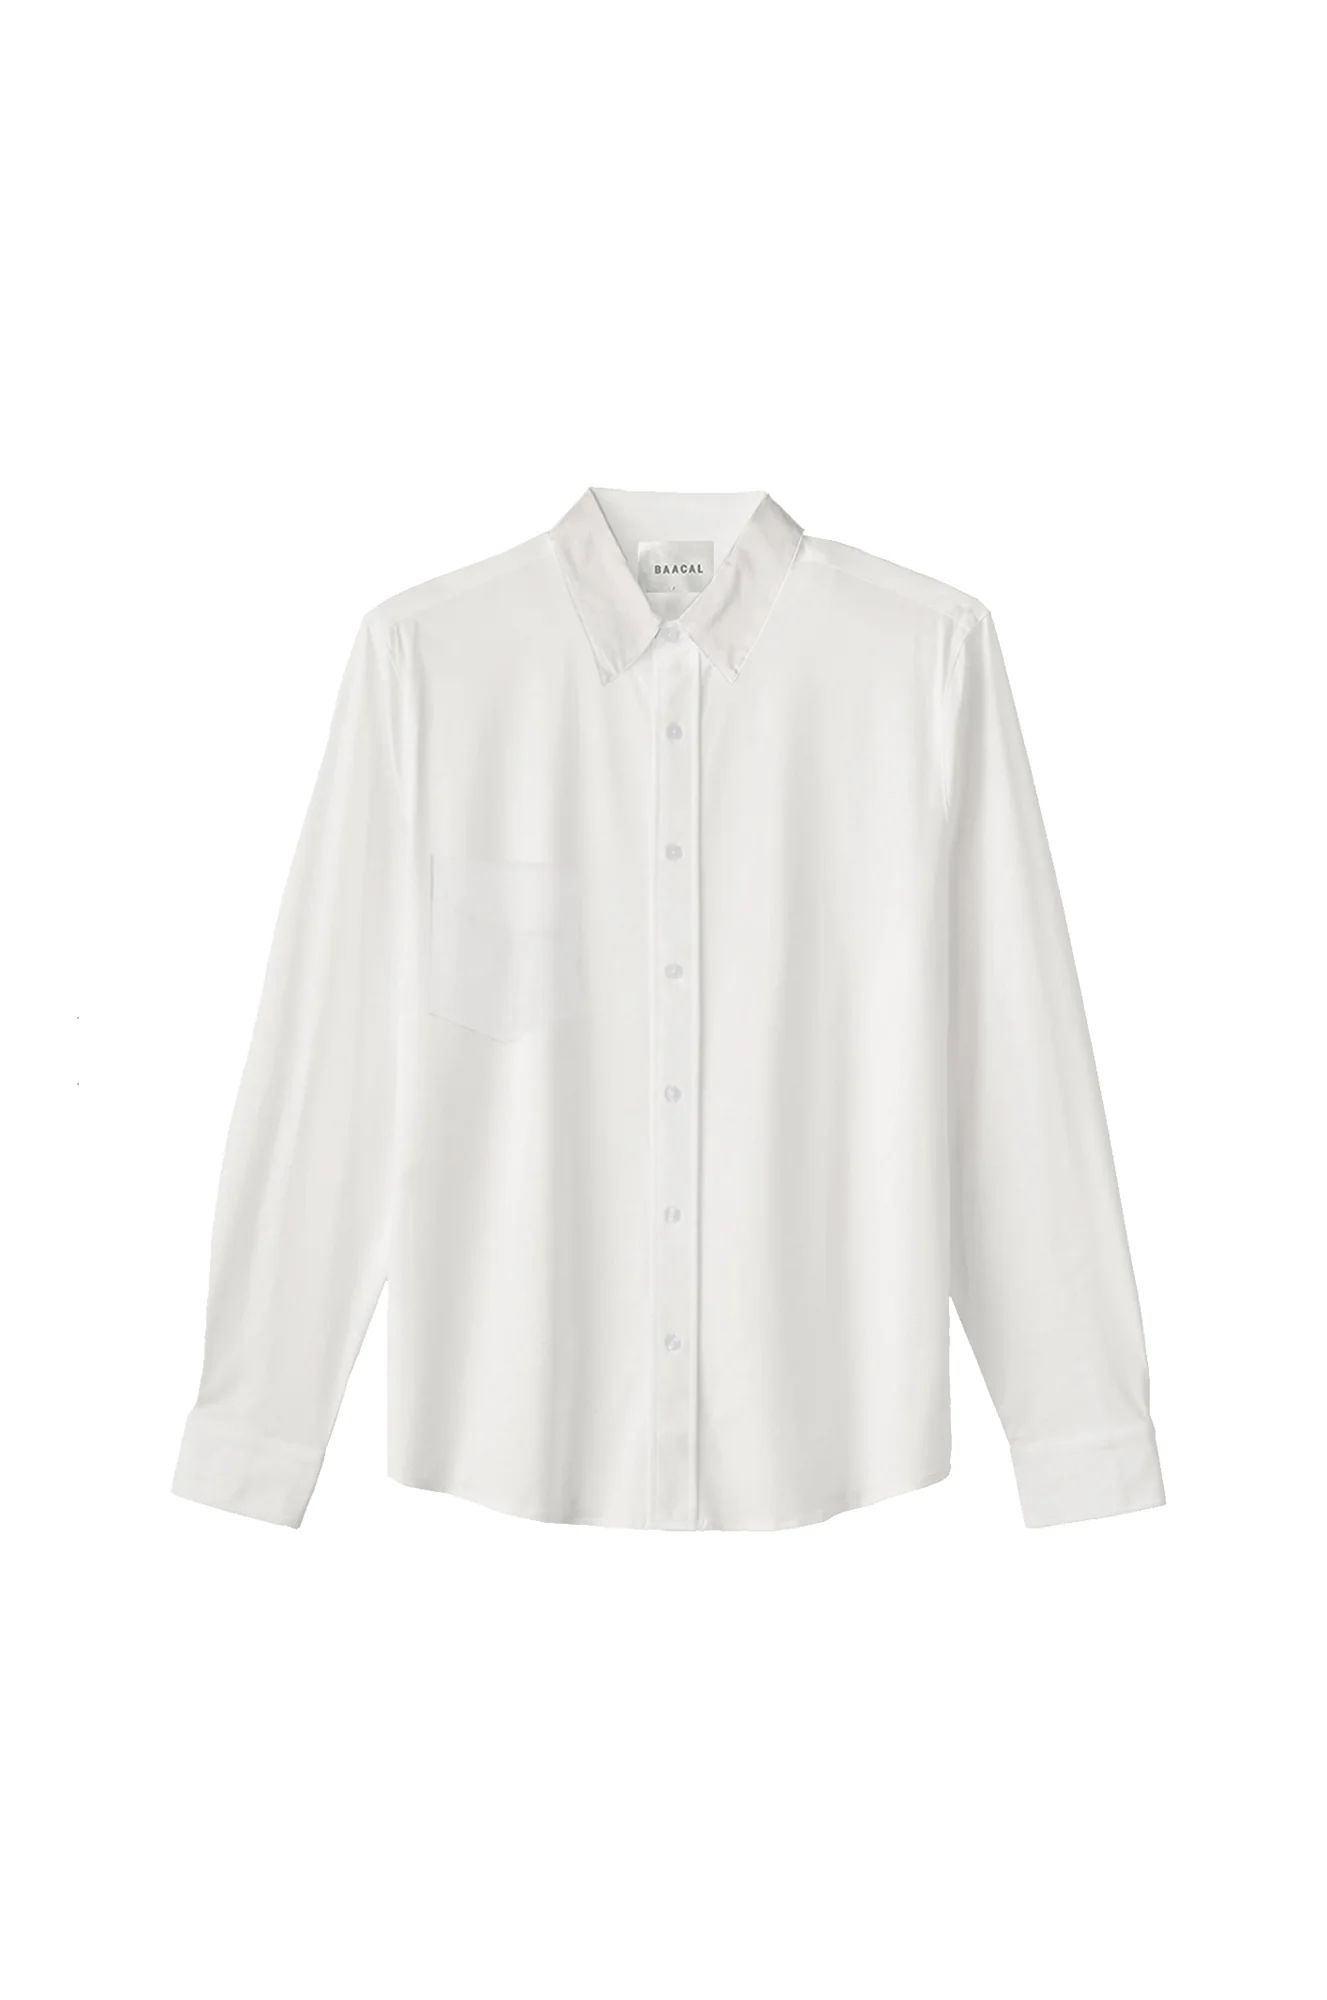 Women's oversized classic white cotton shirt Cynthia Vincent BAACAL | BAACAL Limited, LLC